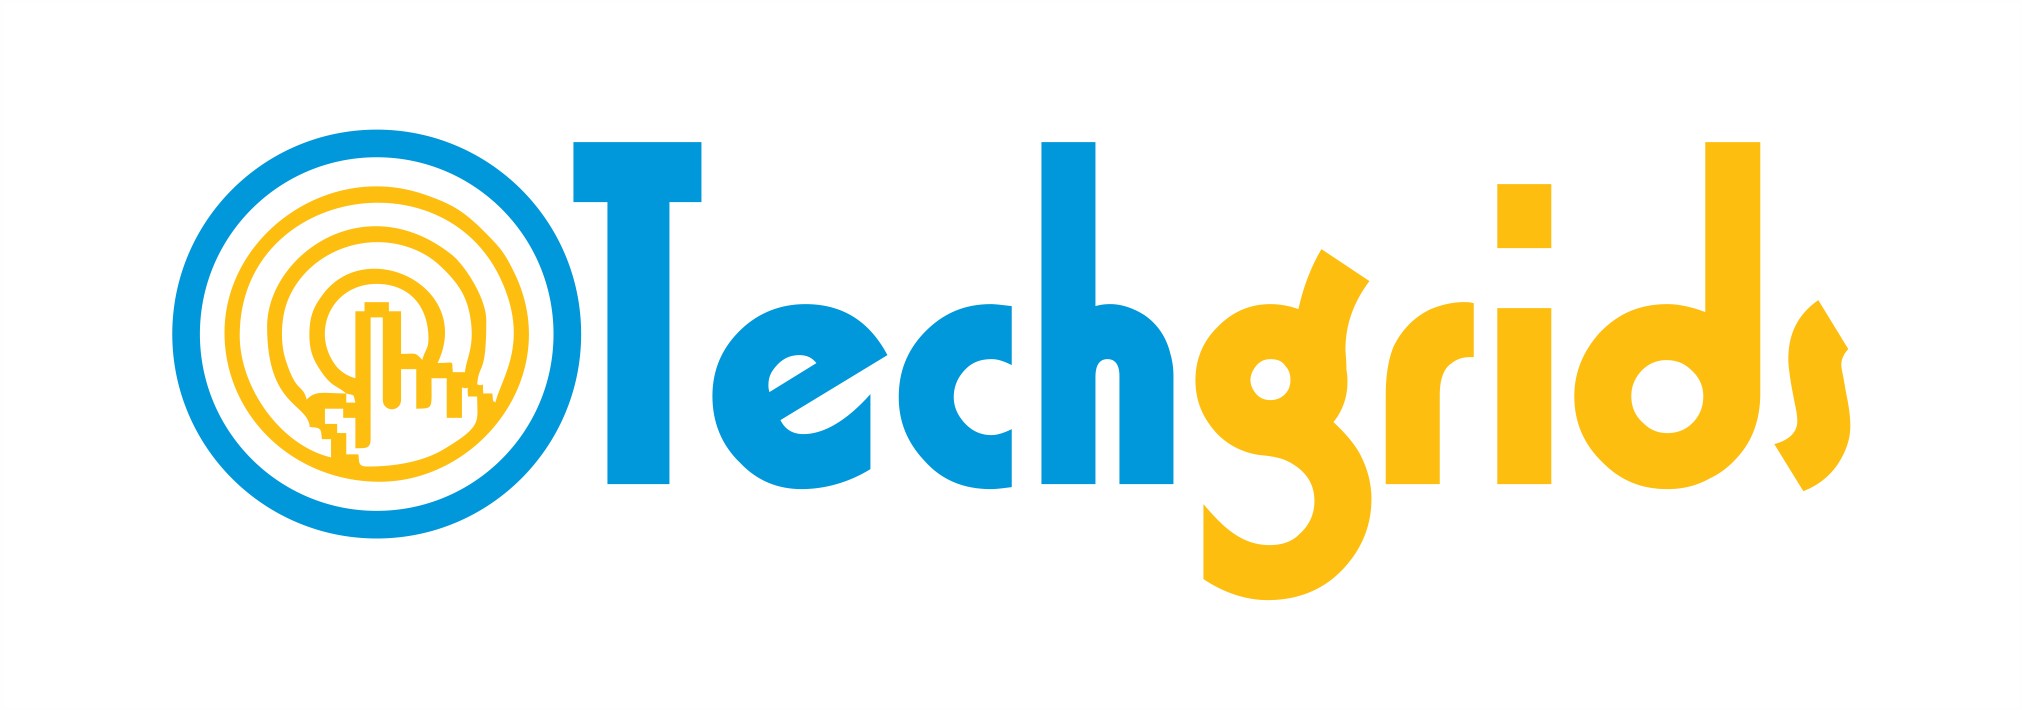 Techgrids Ltd profile on Qualified.One